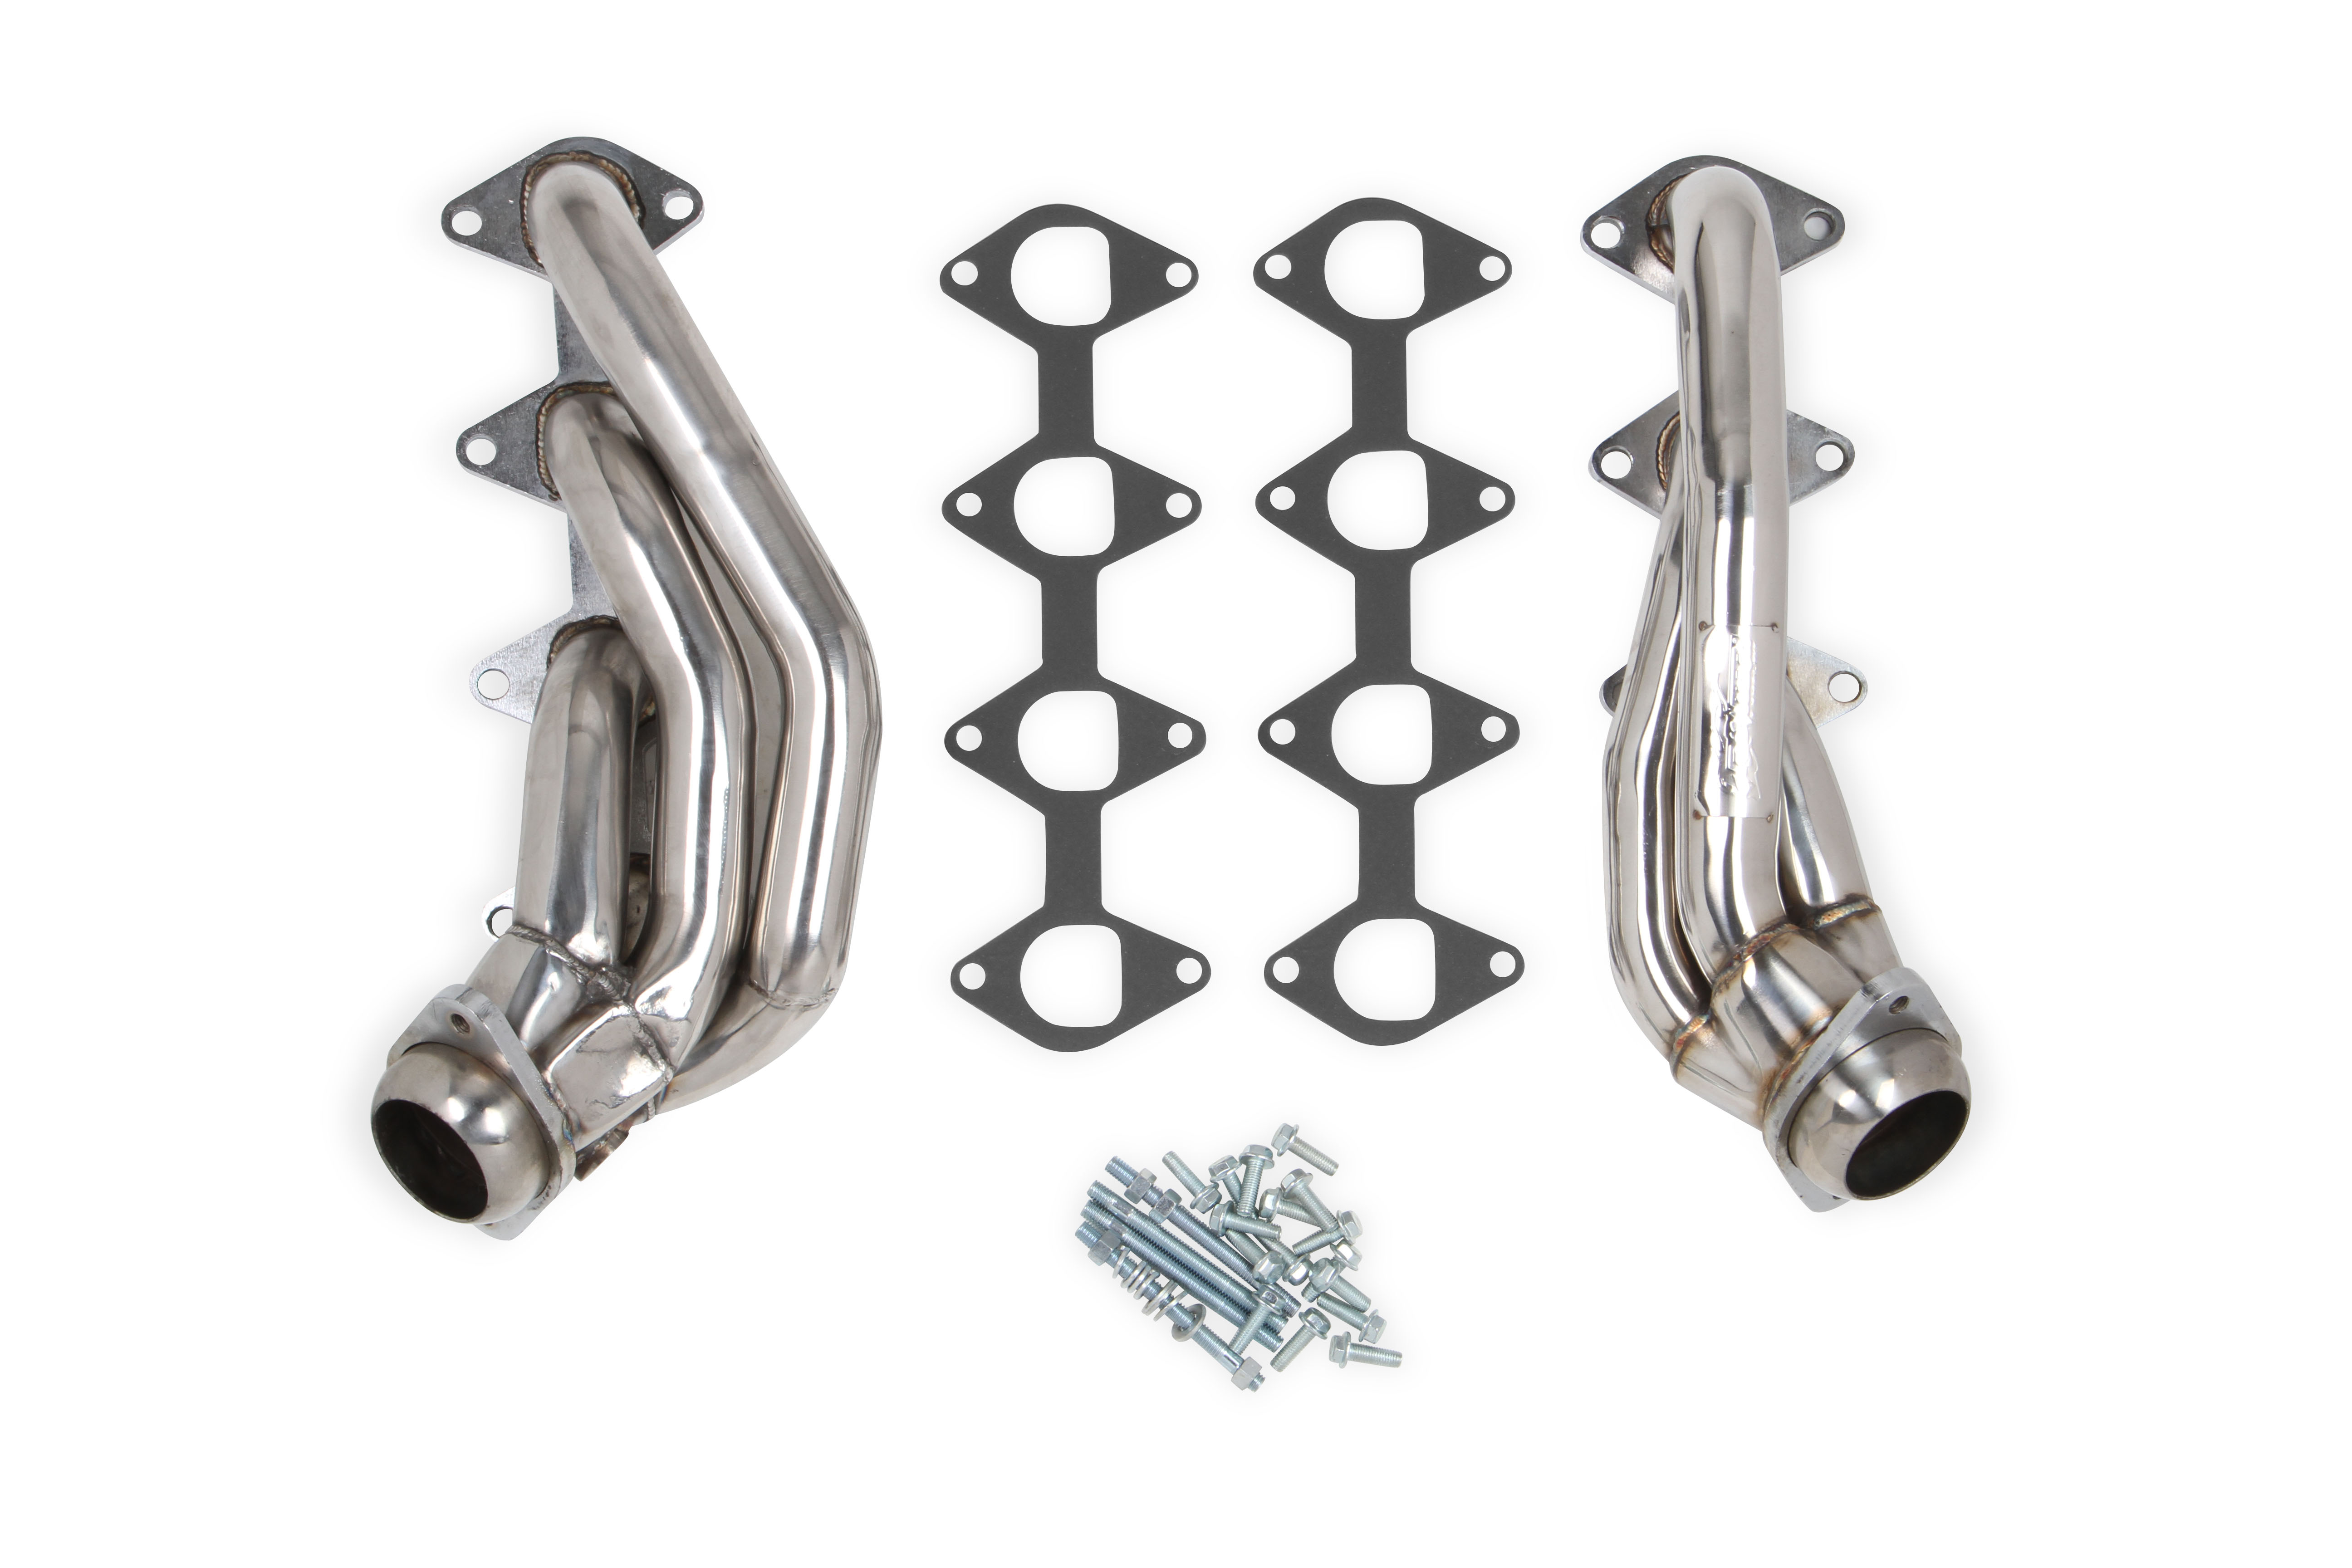 2005-2010 Ford Mustang 4.6L V8 Flowtech 1 5/8" 304SS Shorty Headers - Polished Finish